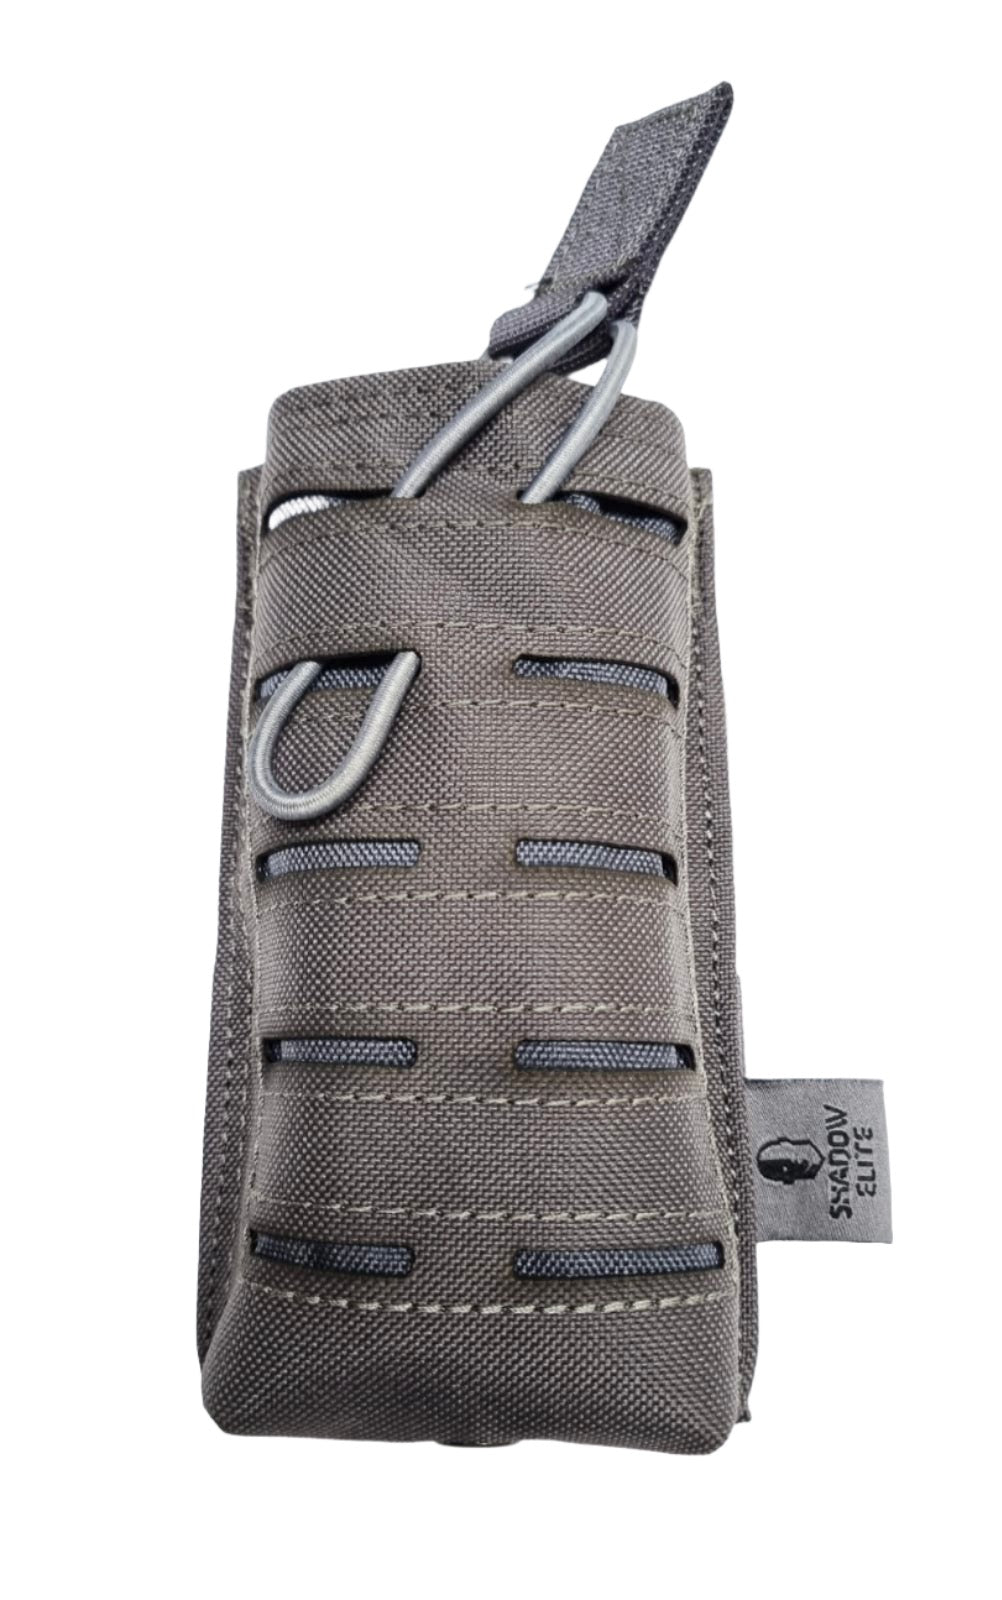 SHE-20040 Single Rapid Response Mag Pouch